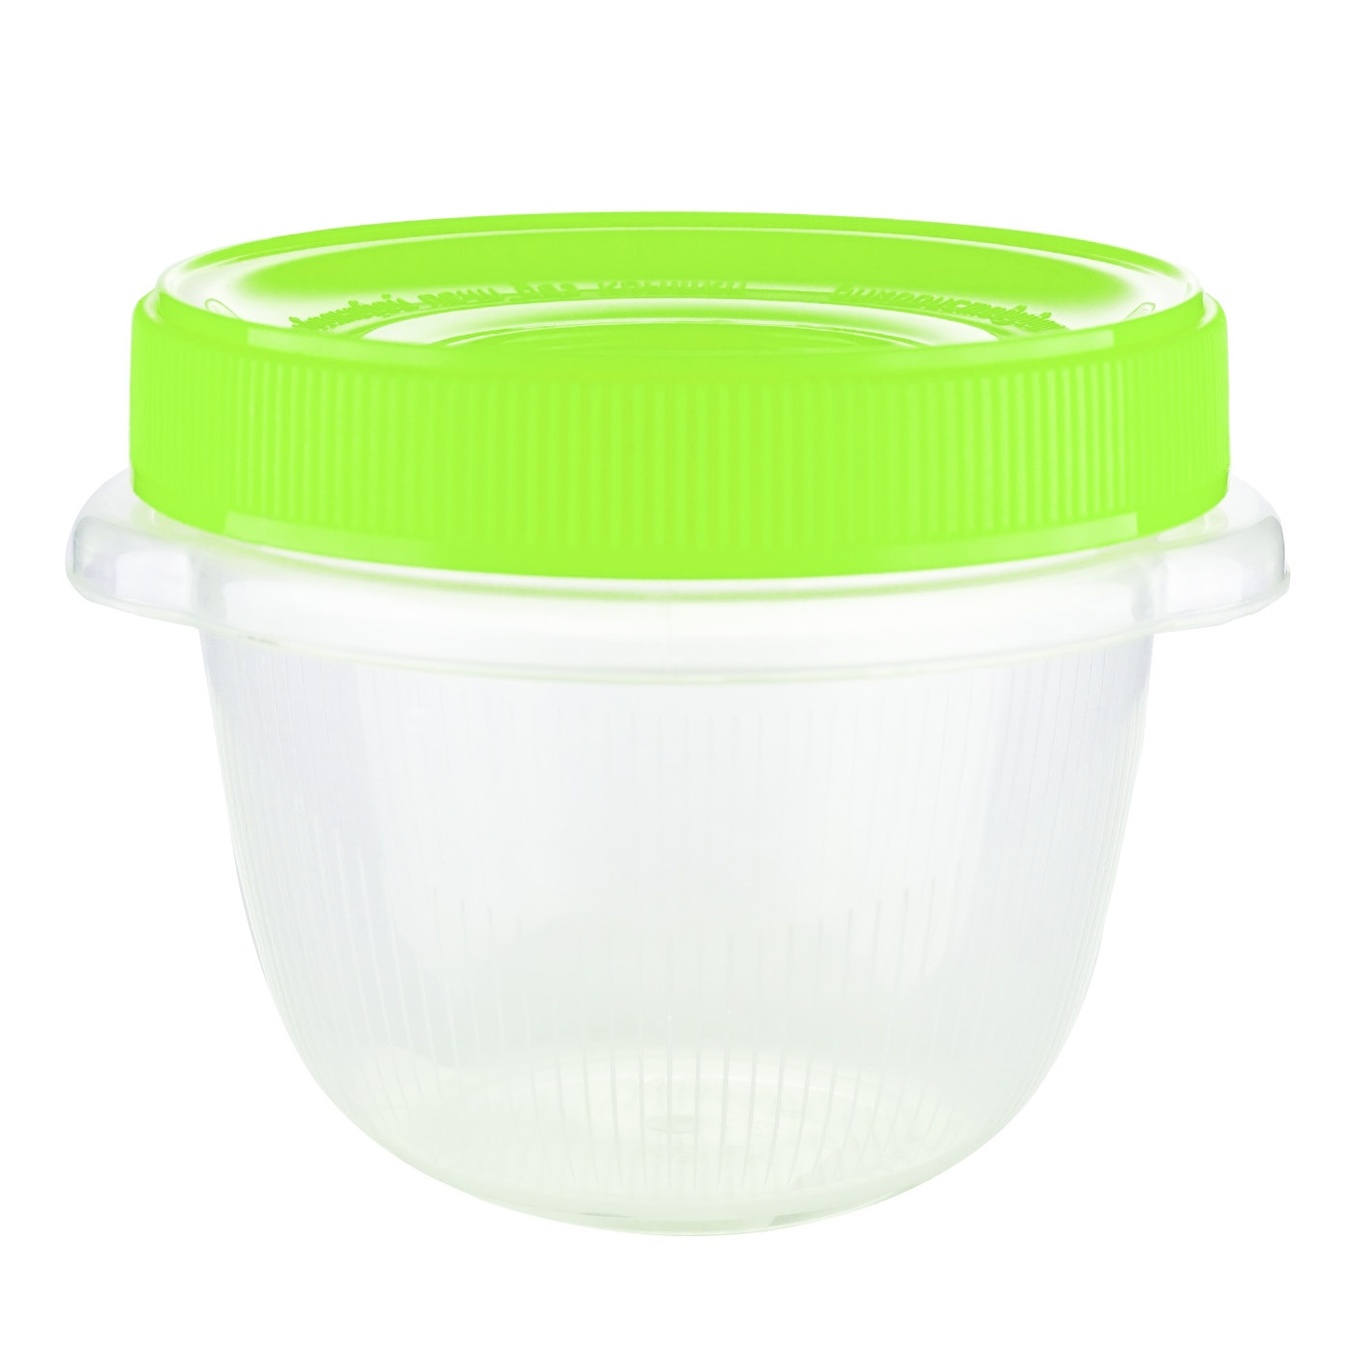 Aleana container for storing food products Omega round transparent/olive 0.285 l